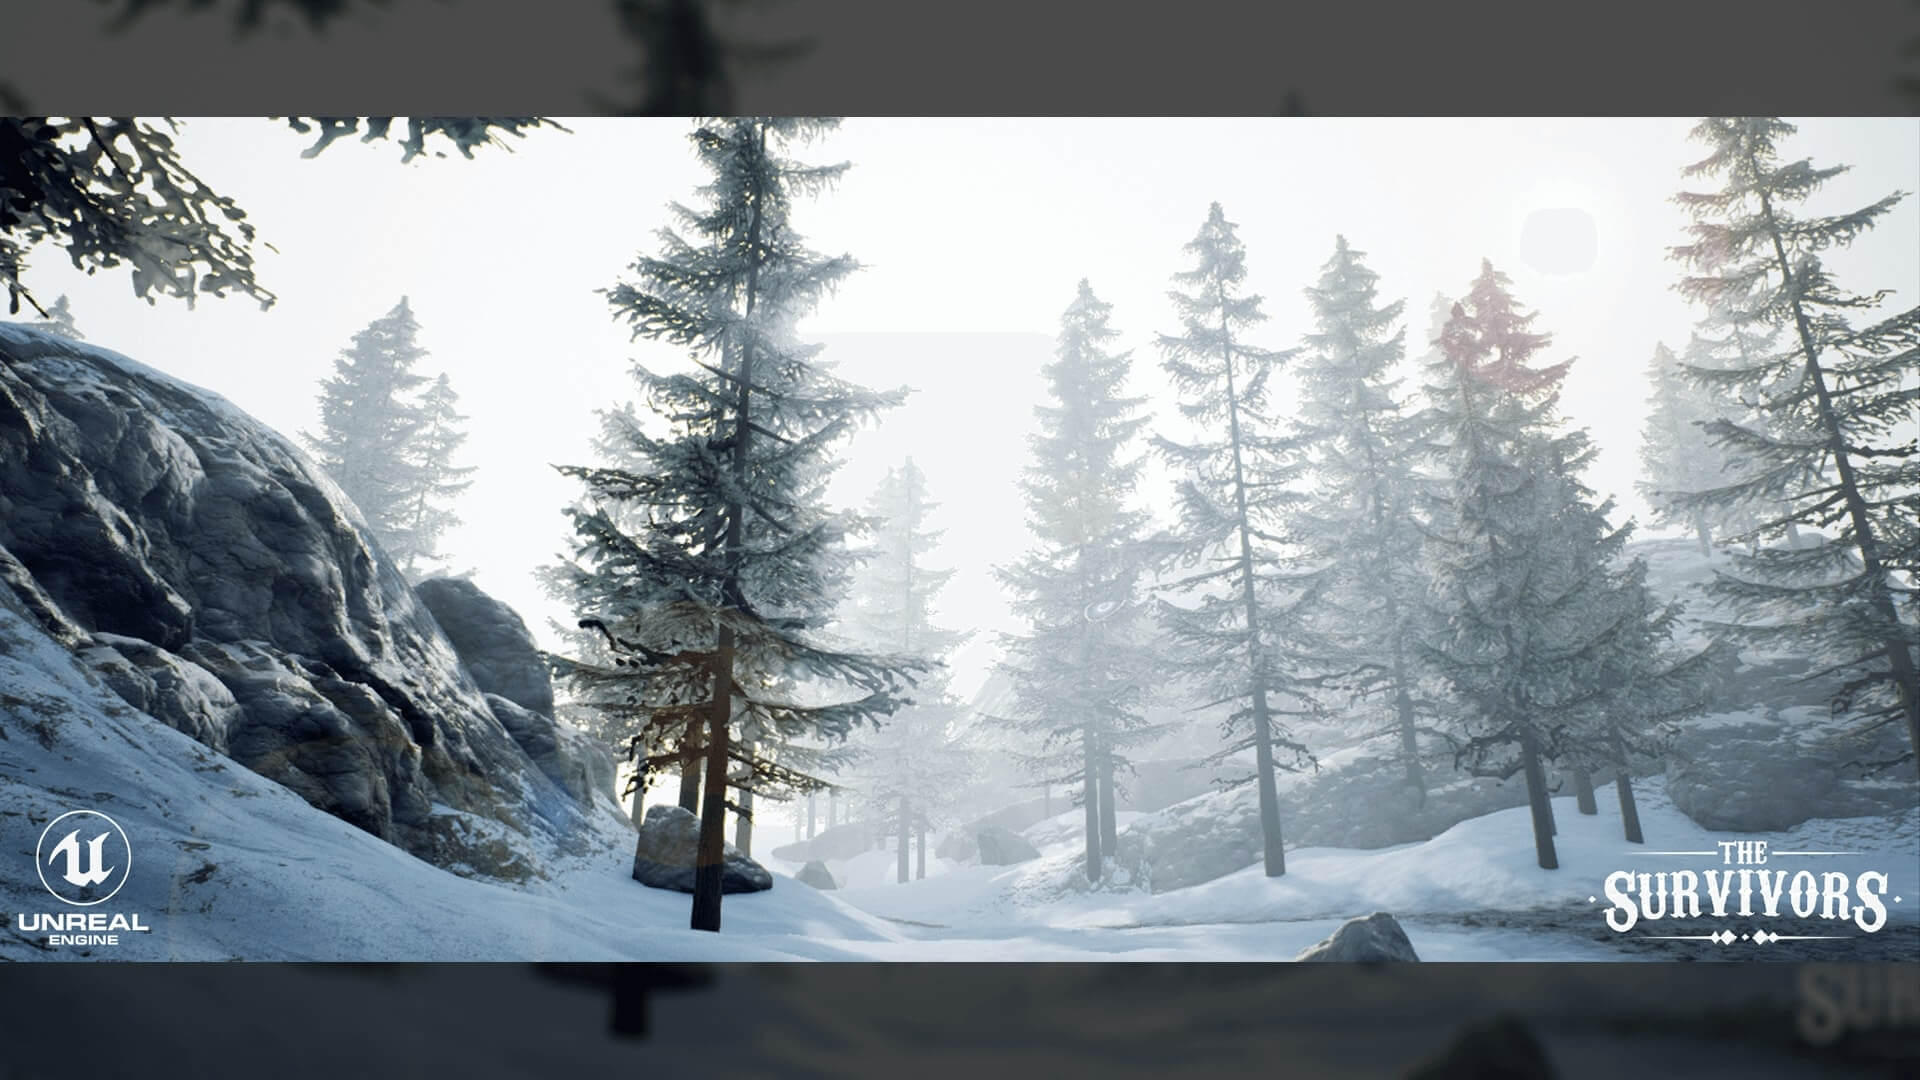 A wide angled screenshot of a snowy valley with trees and rocks.